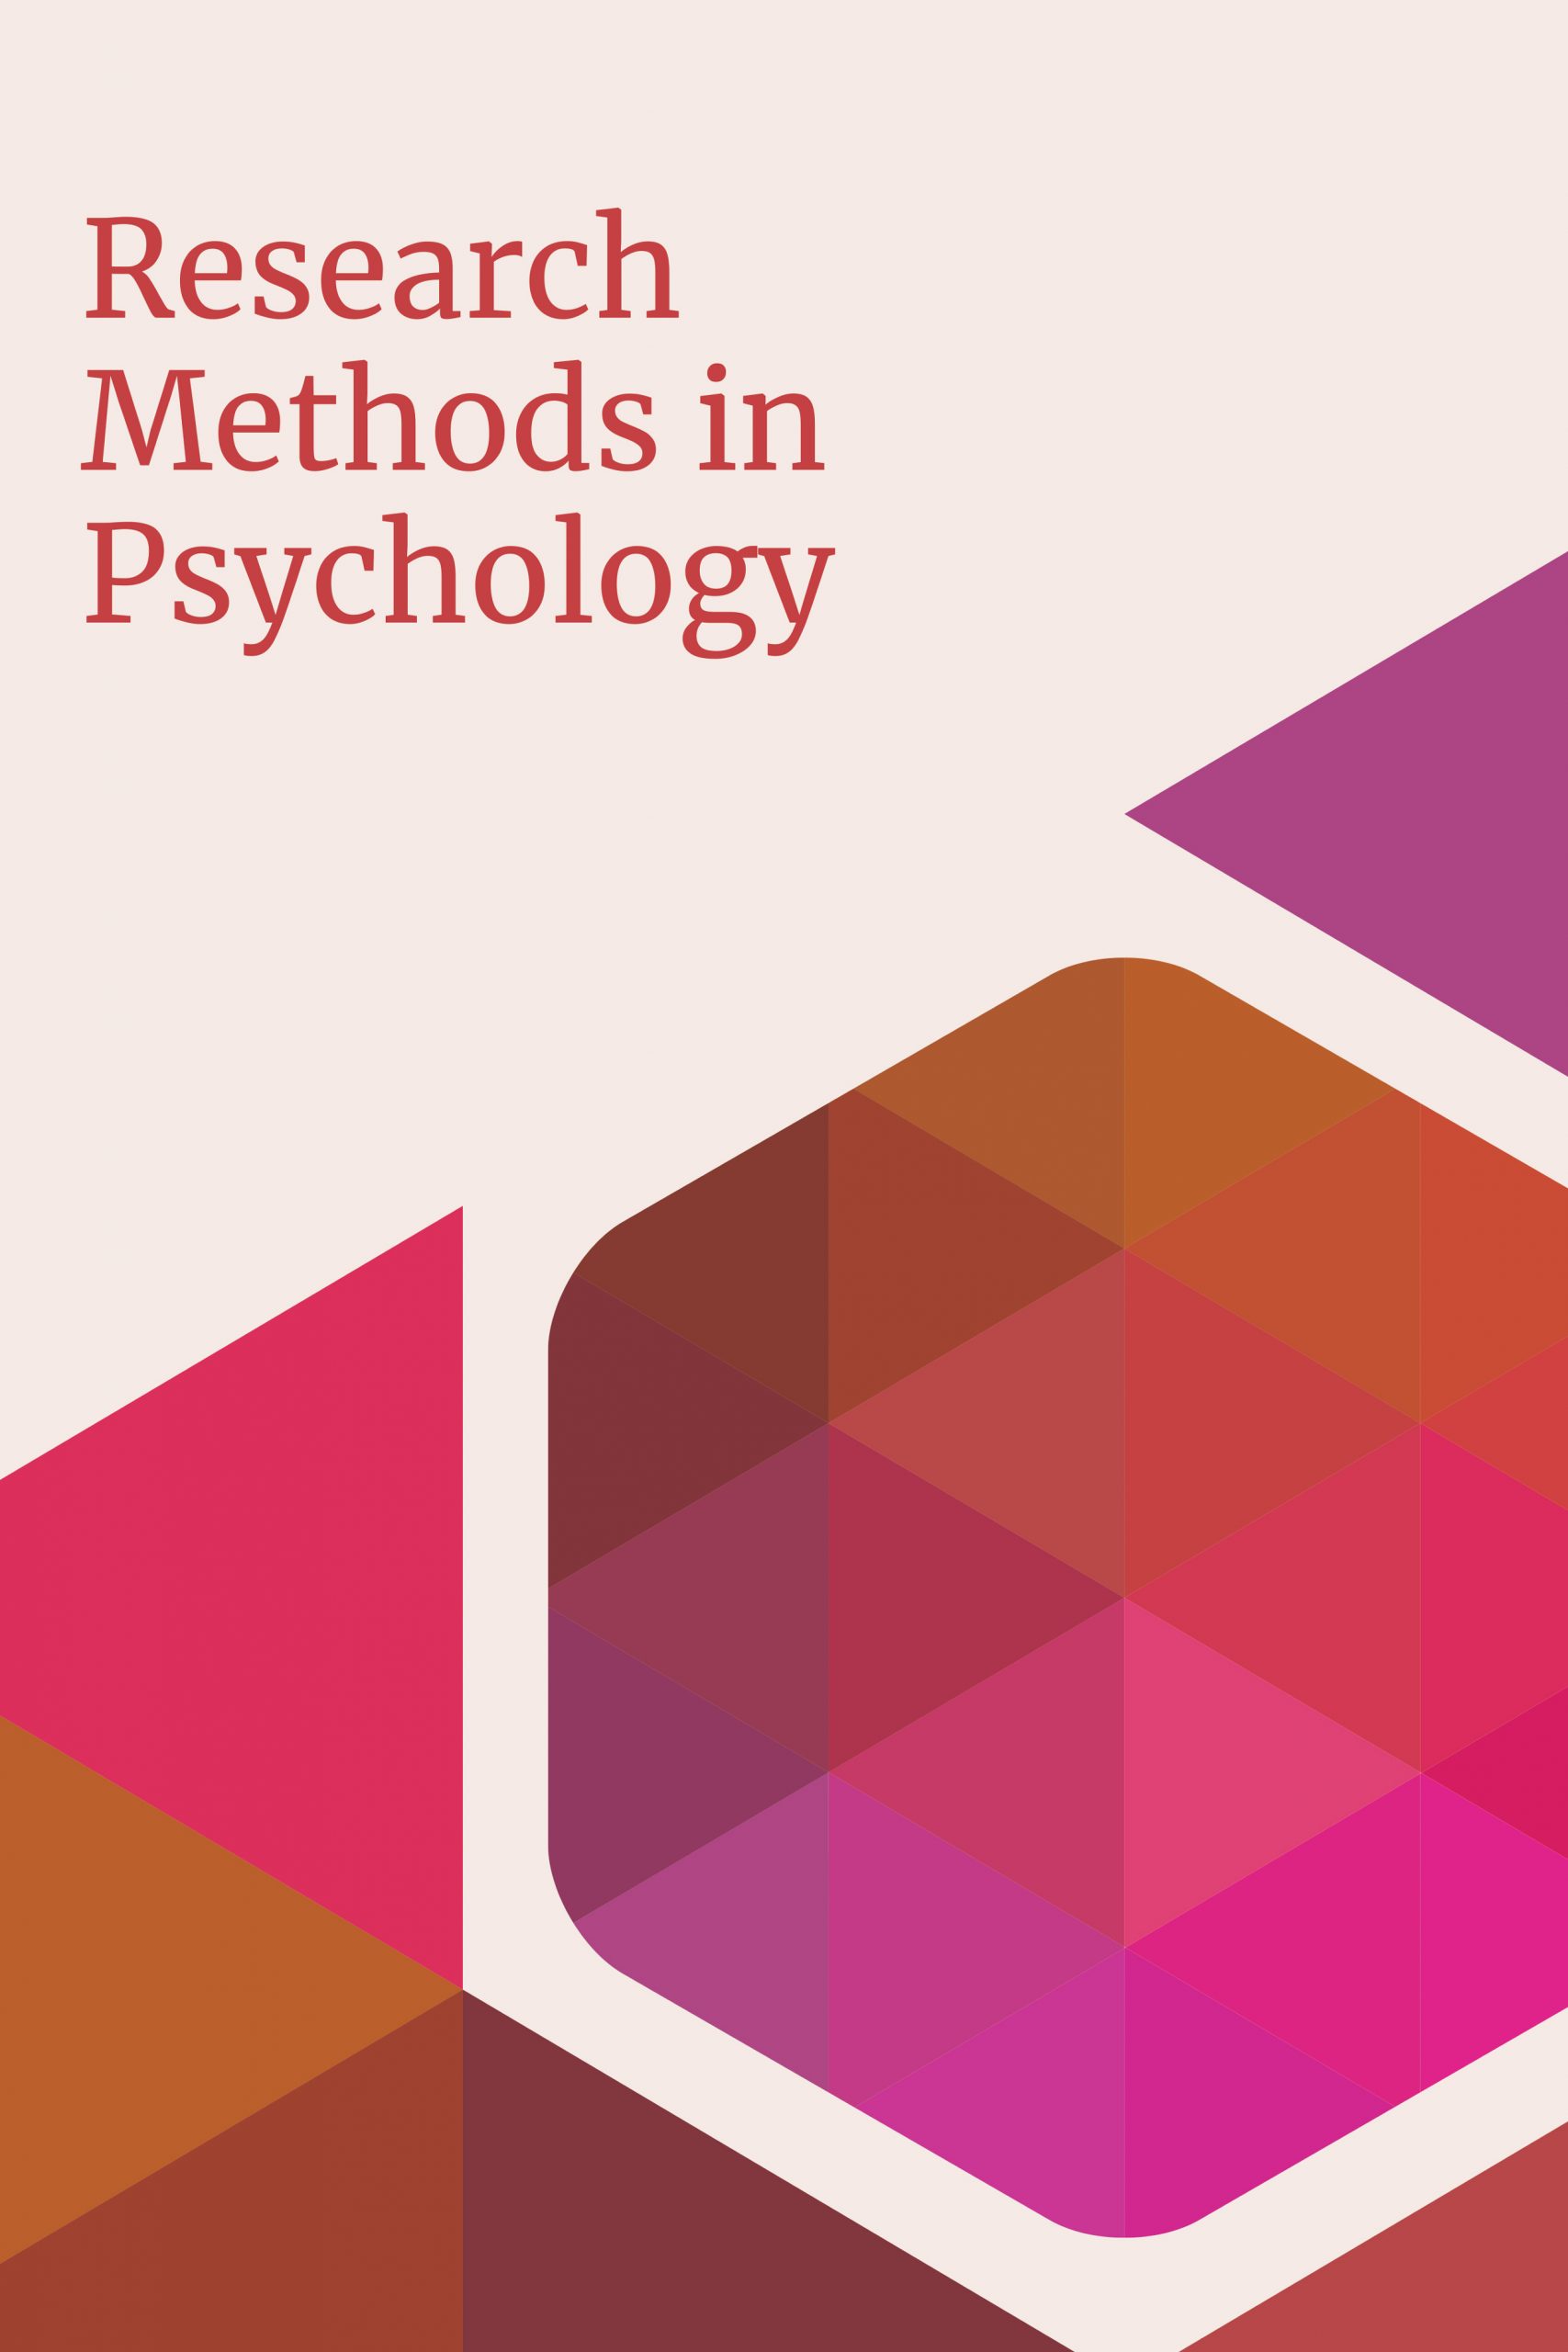 research methods in psychology textbook price